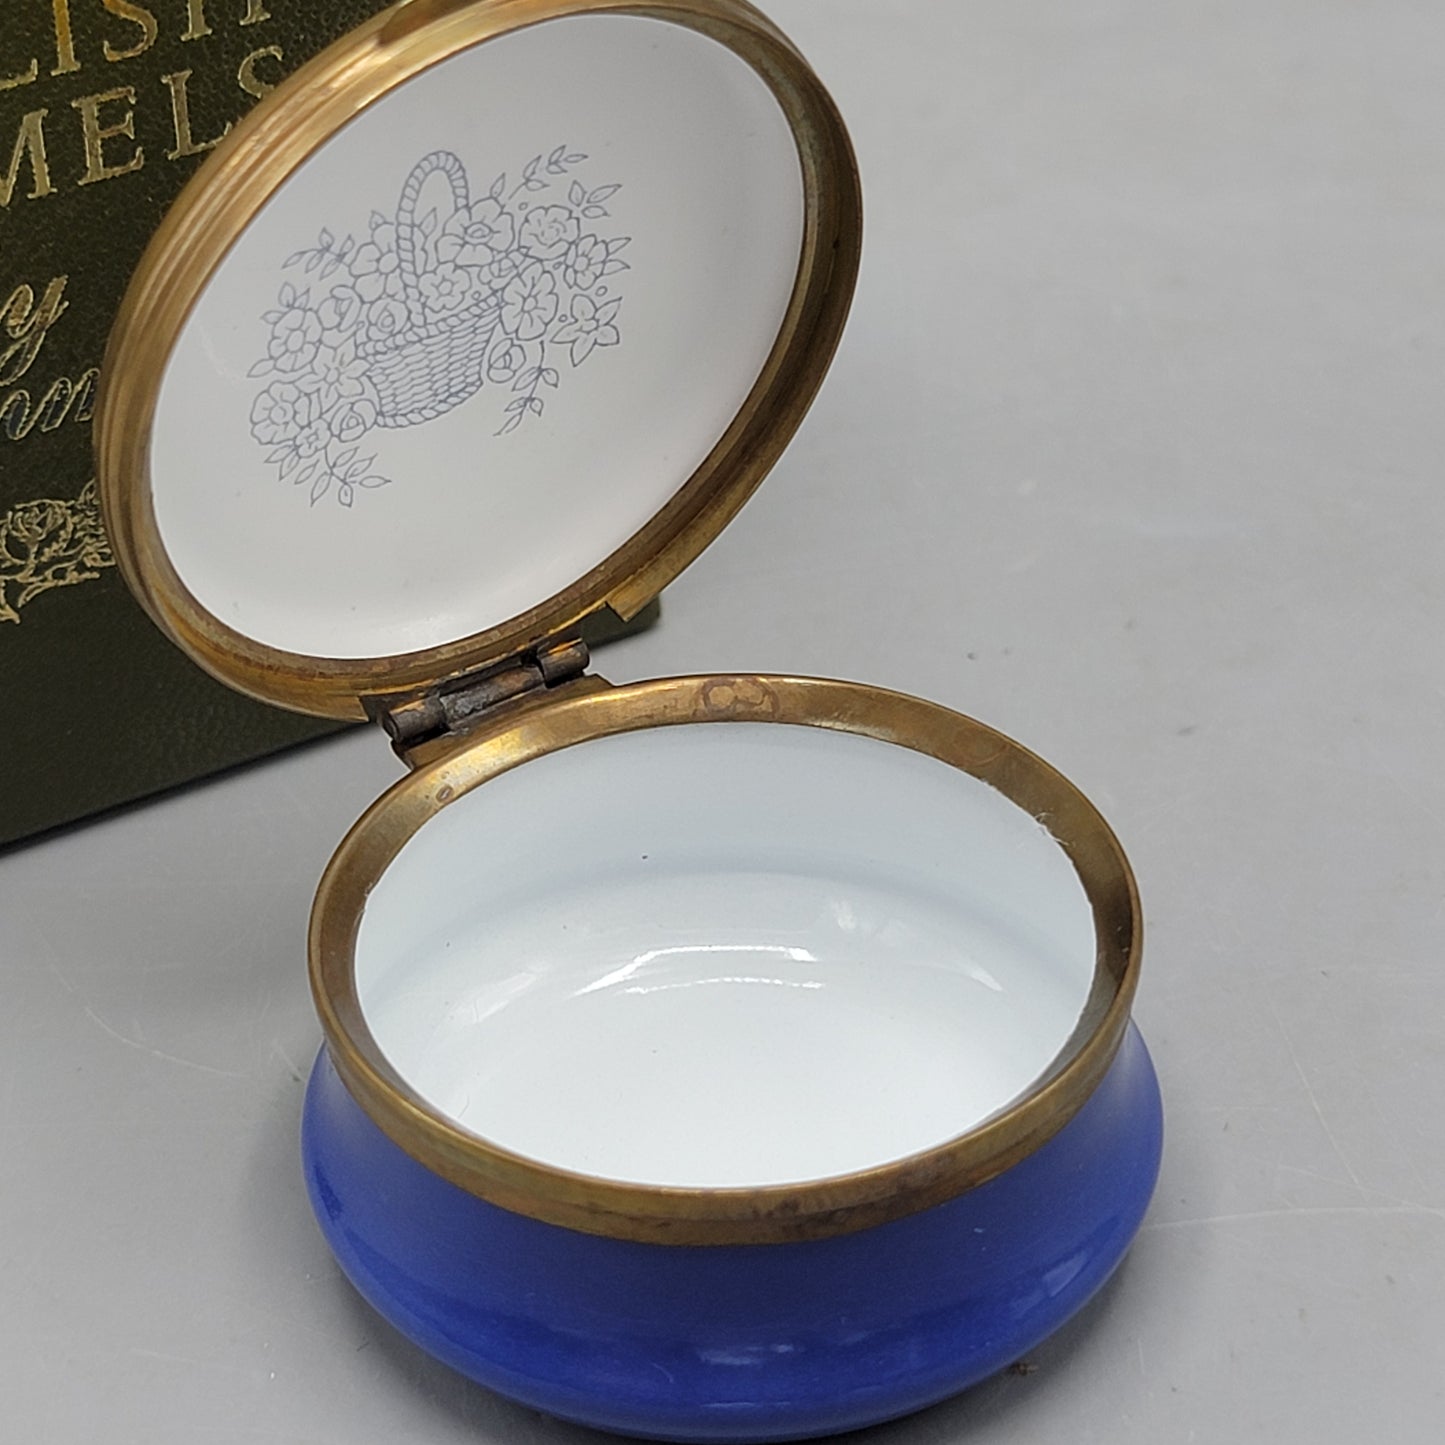 Crummles & Co England Enamel Box - A Moment Enjoyed Is Never Wasted